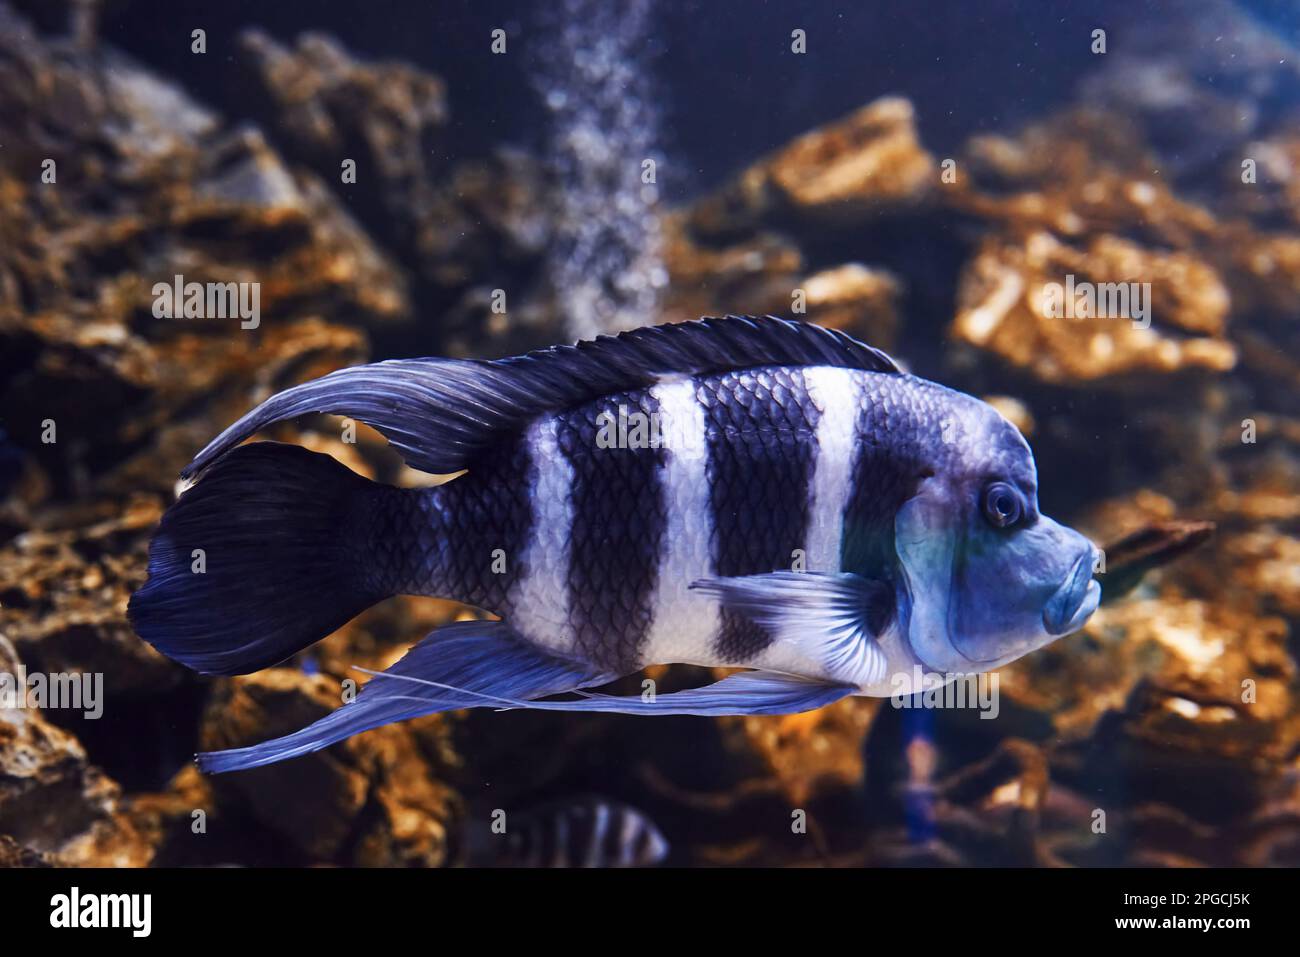 Cyphotilapia frontosa. Underwater close up view of tropical fishes. Life in ocean Stock Photo